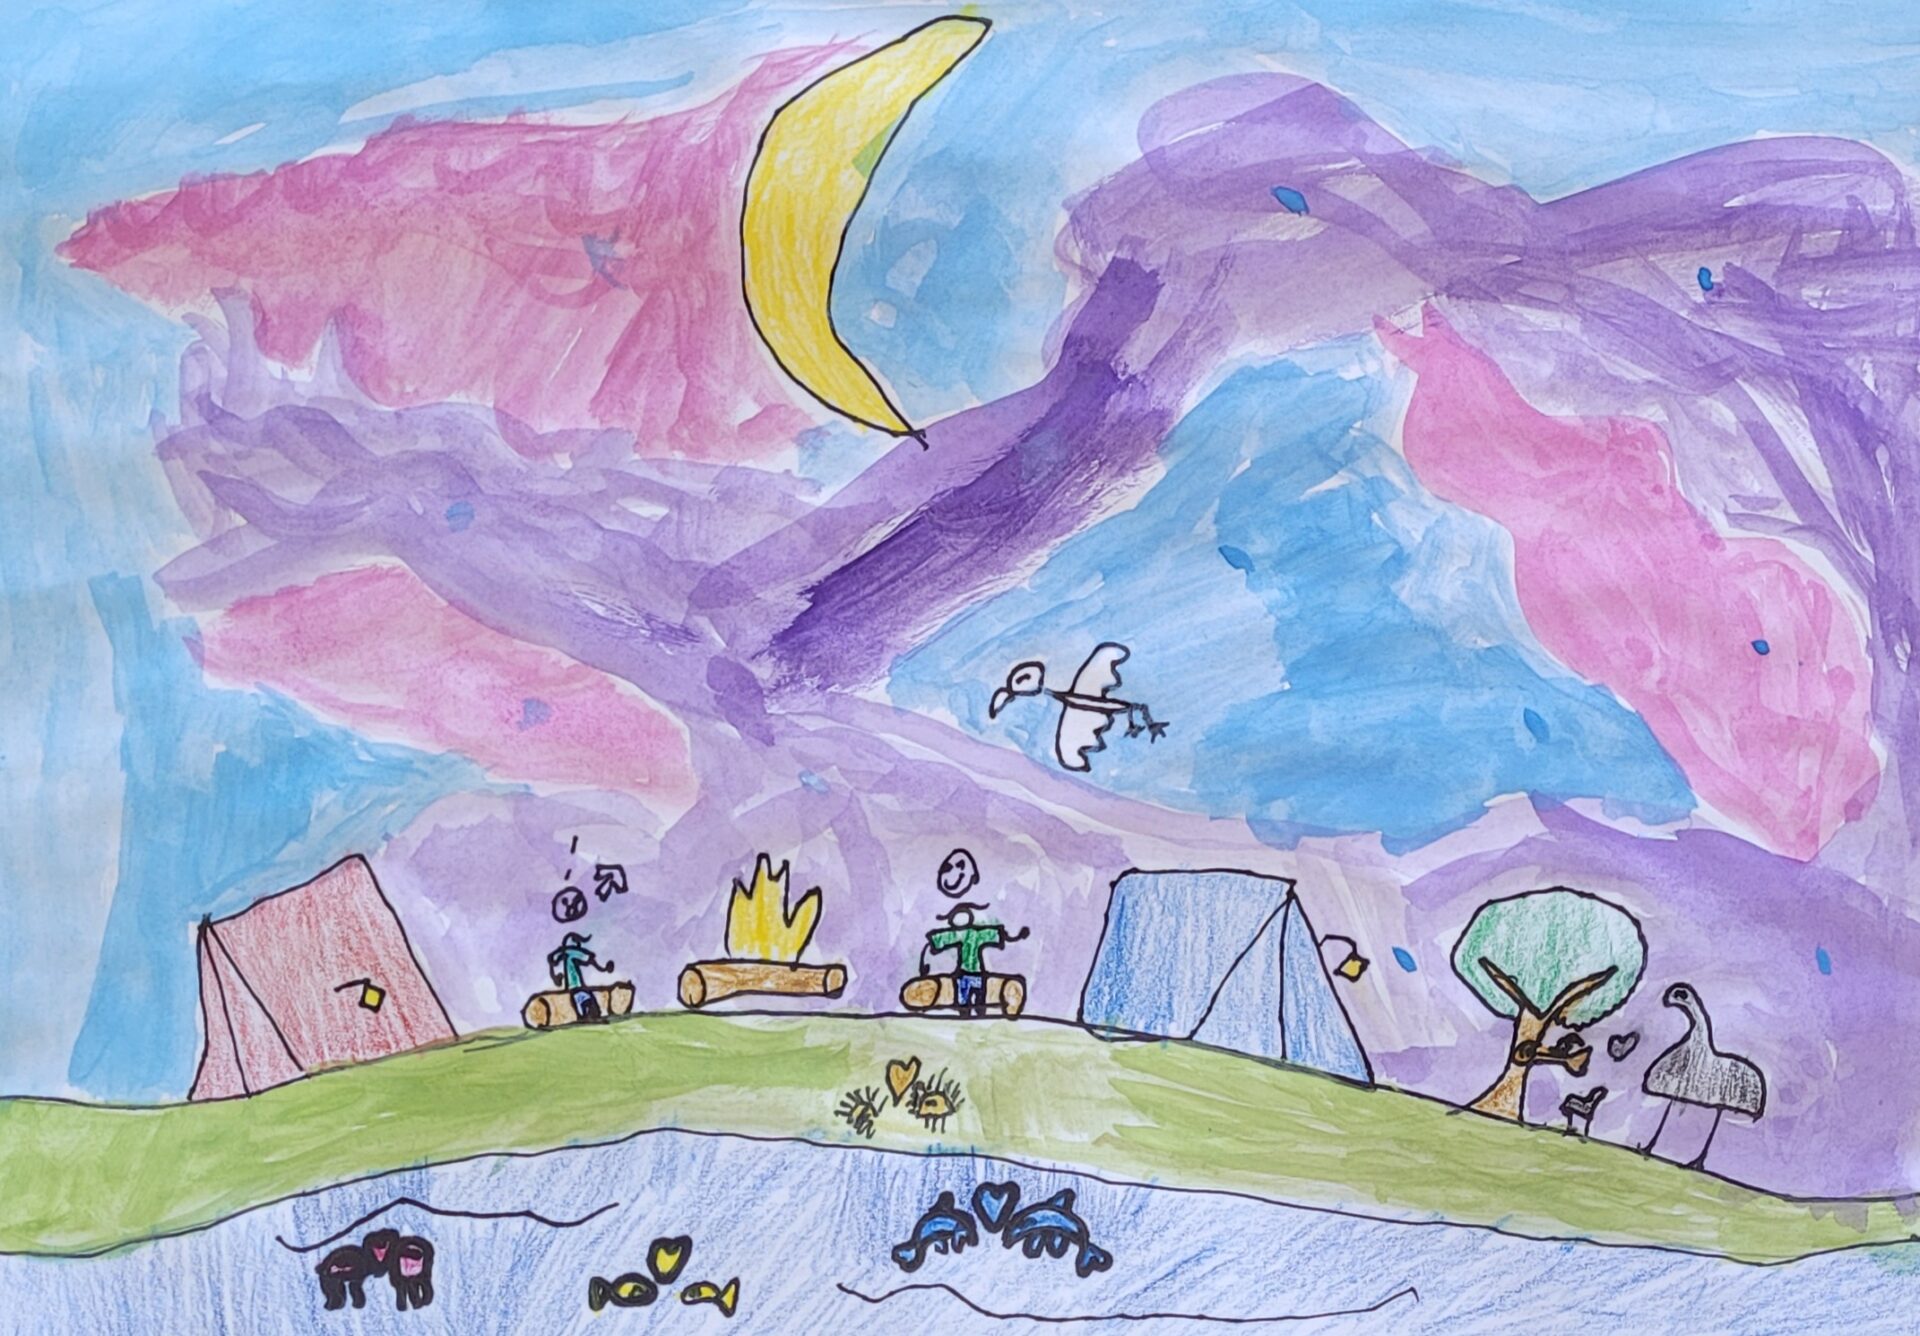 Grade 1 and 2 First Prize - Liam Mathers - Red Cliffs Primary School and STATE (joint) Third Prize Winner 